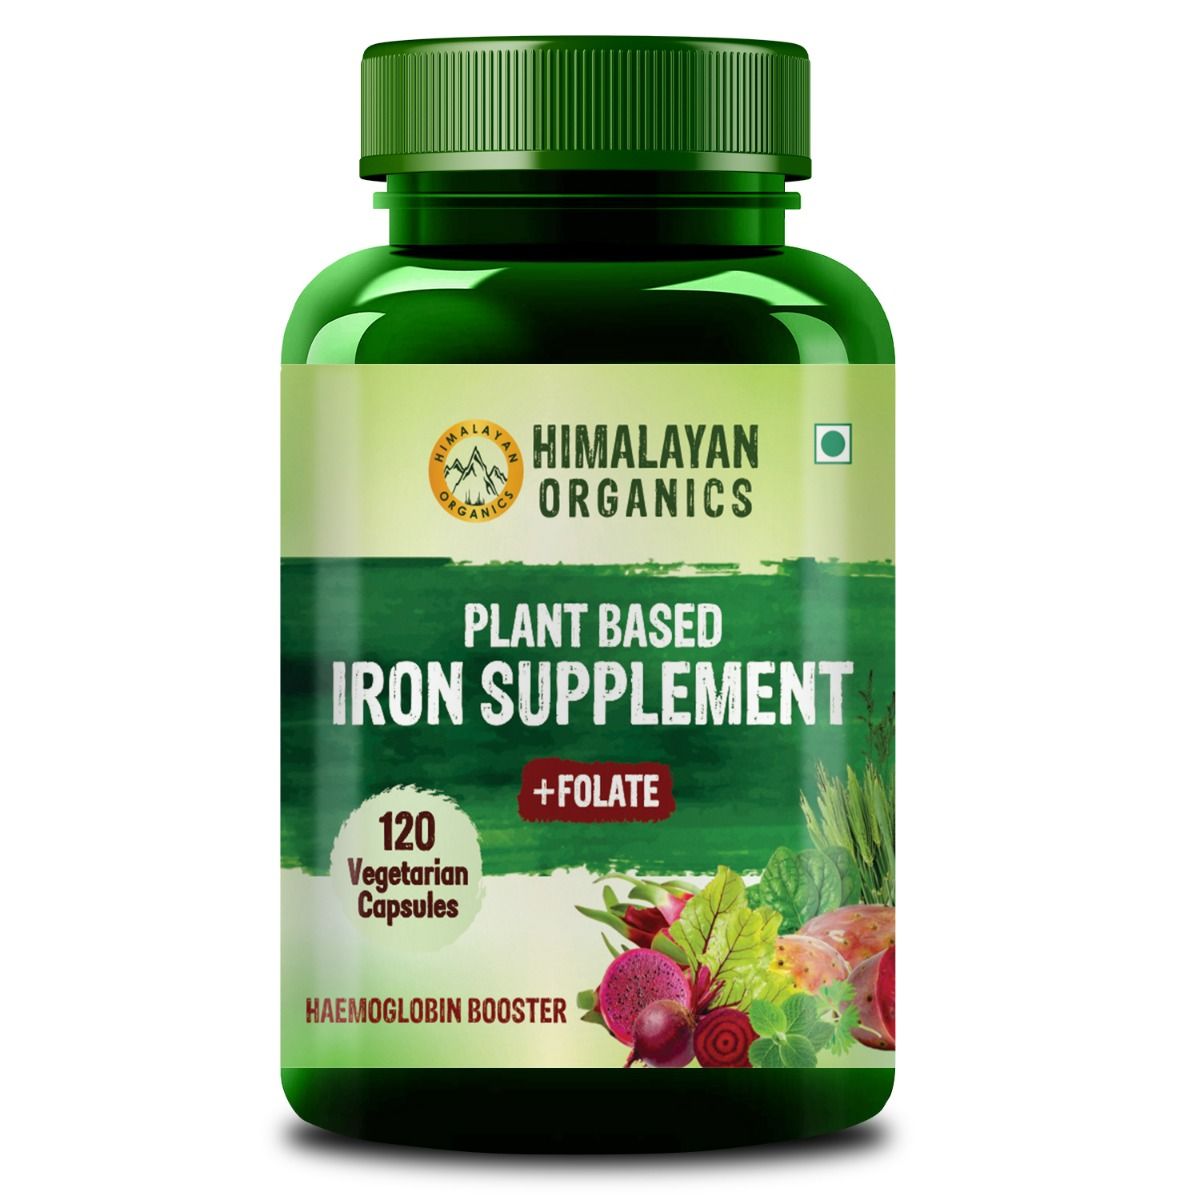 Buy Himalayan Organics Plant Based Iron Supplement with Folate, 120 Capsules Online